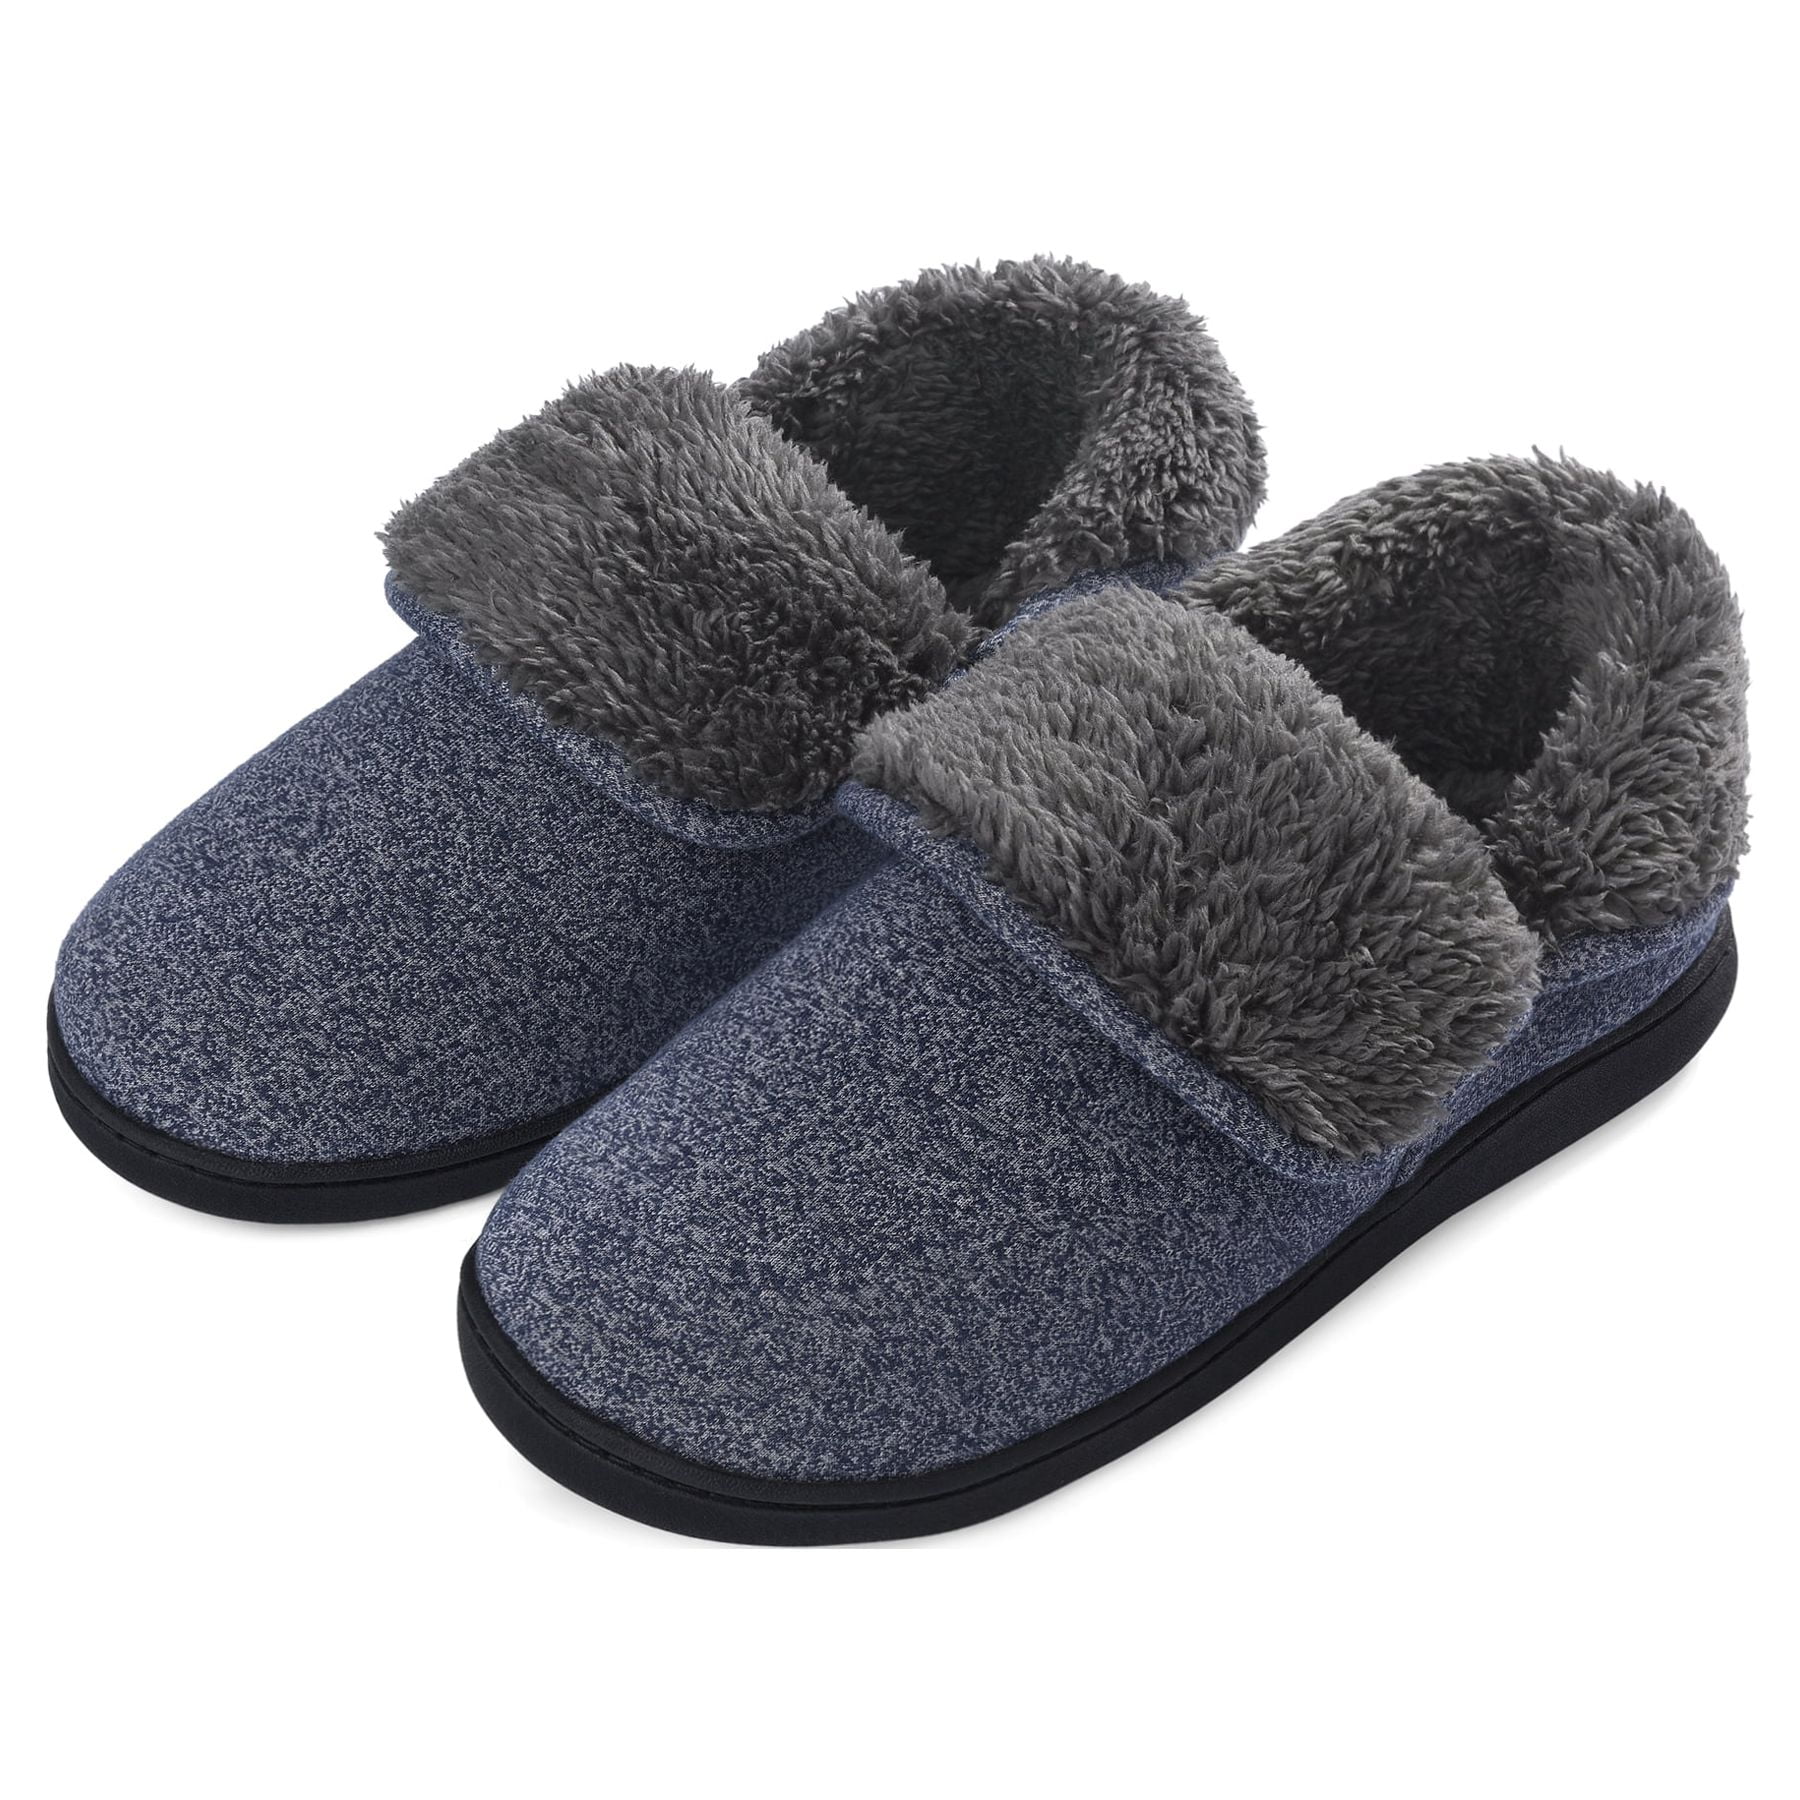 VONMAY Men's Fuzzy Slippers Boots Memory Foam Booties Comfy House Shoes ...